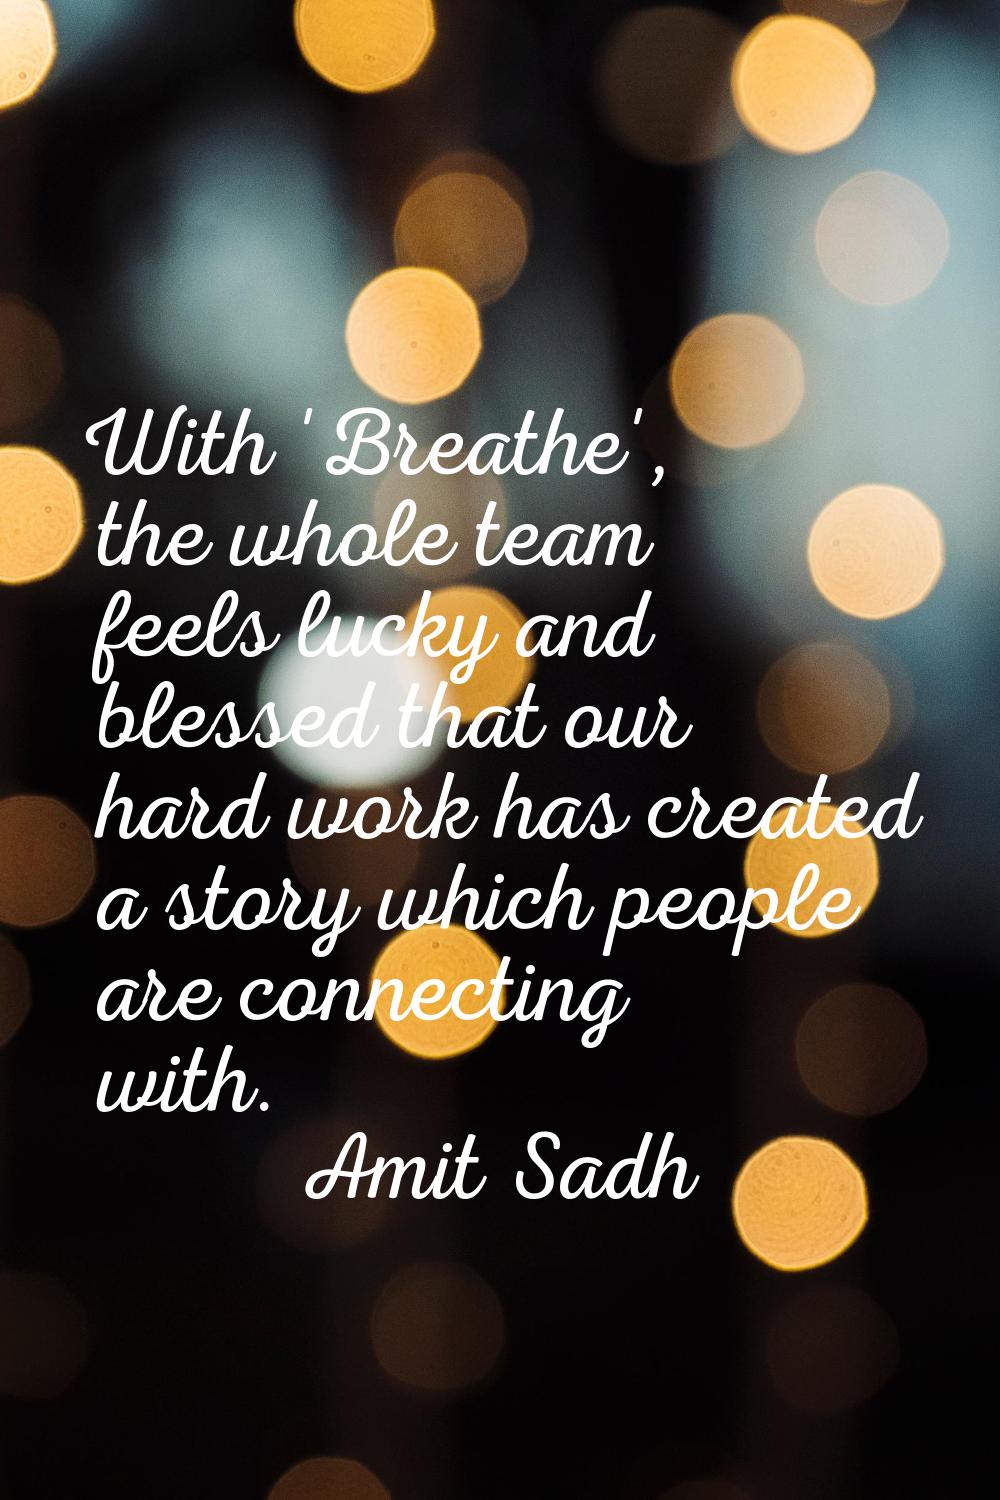 With 'Breathe', the whole team feels lucky and blessed that our hard work has created a story which